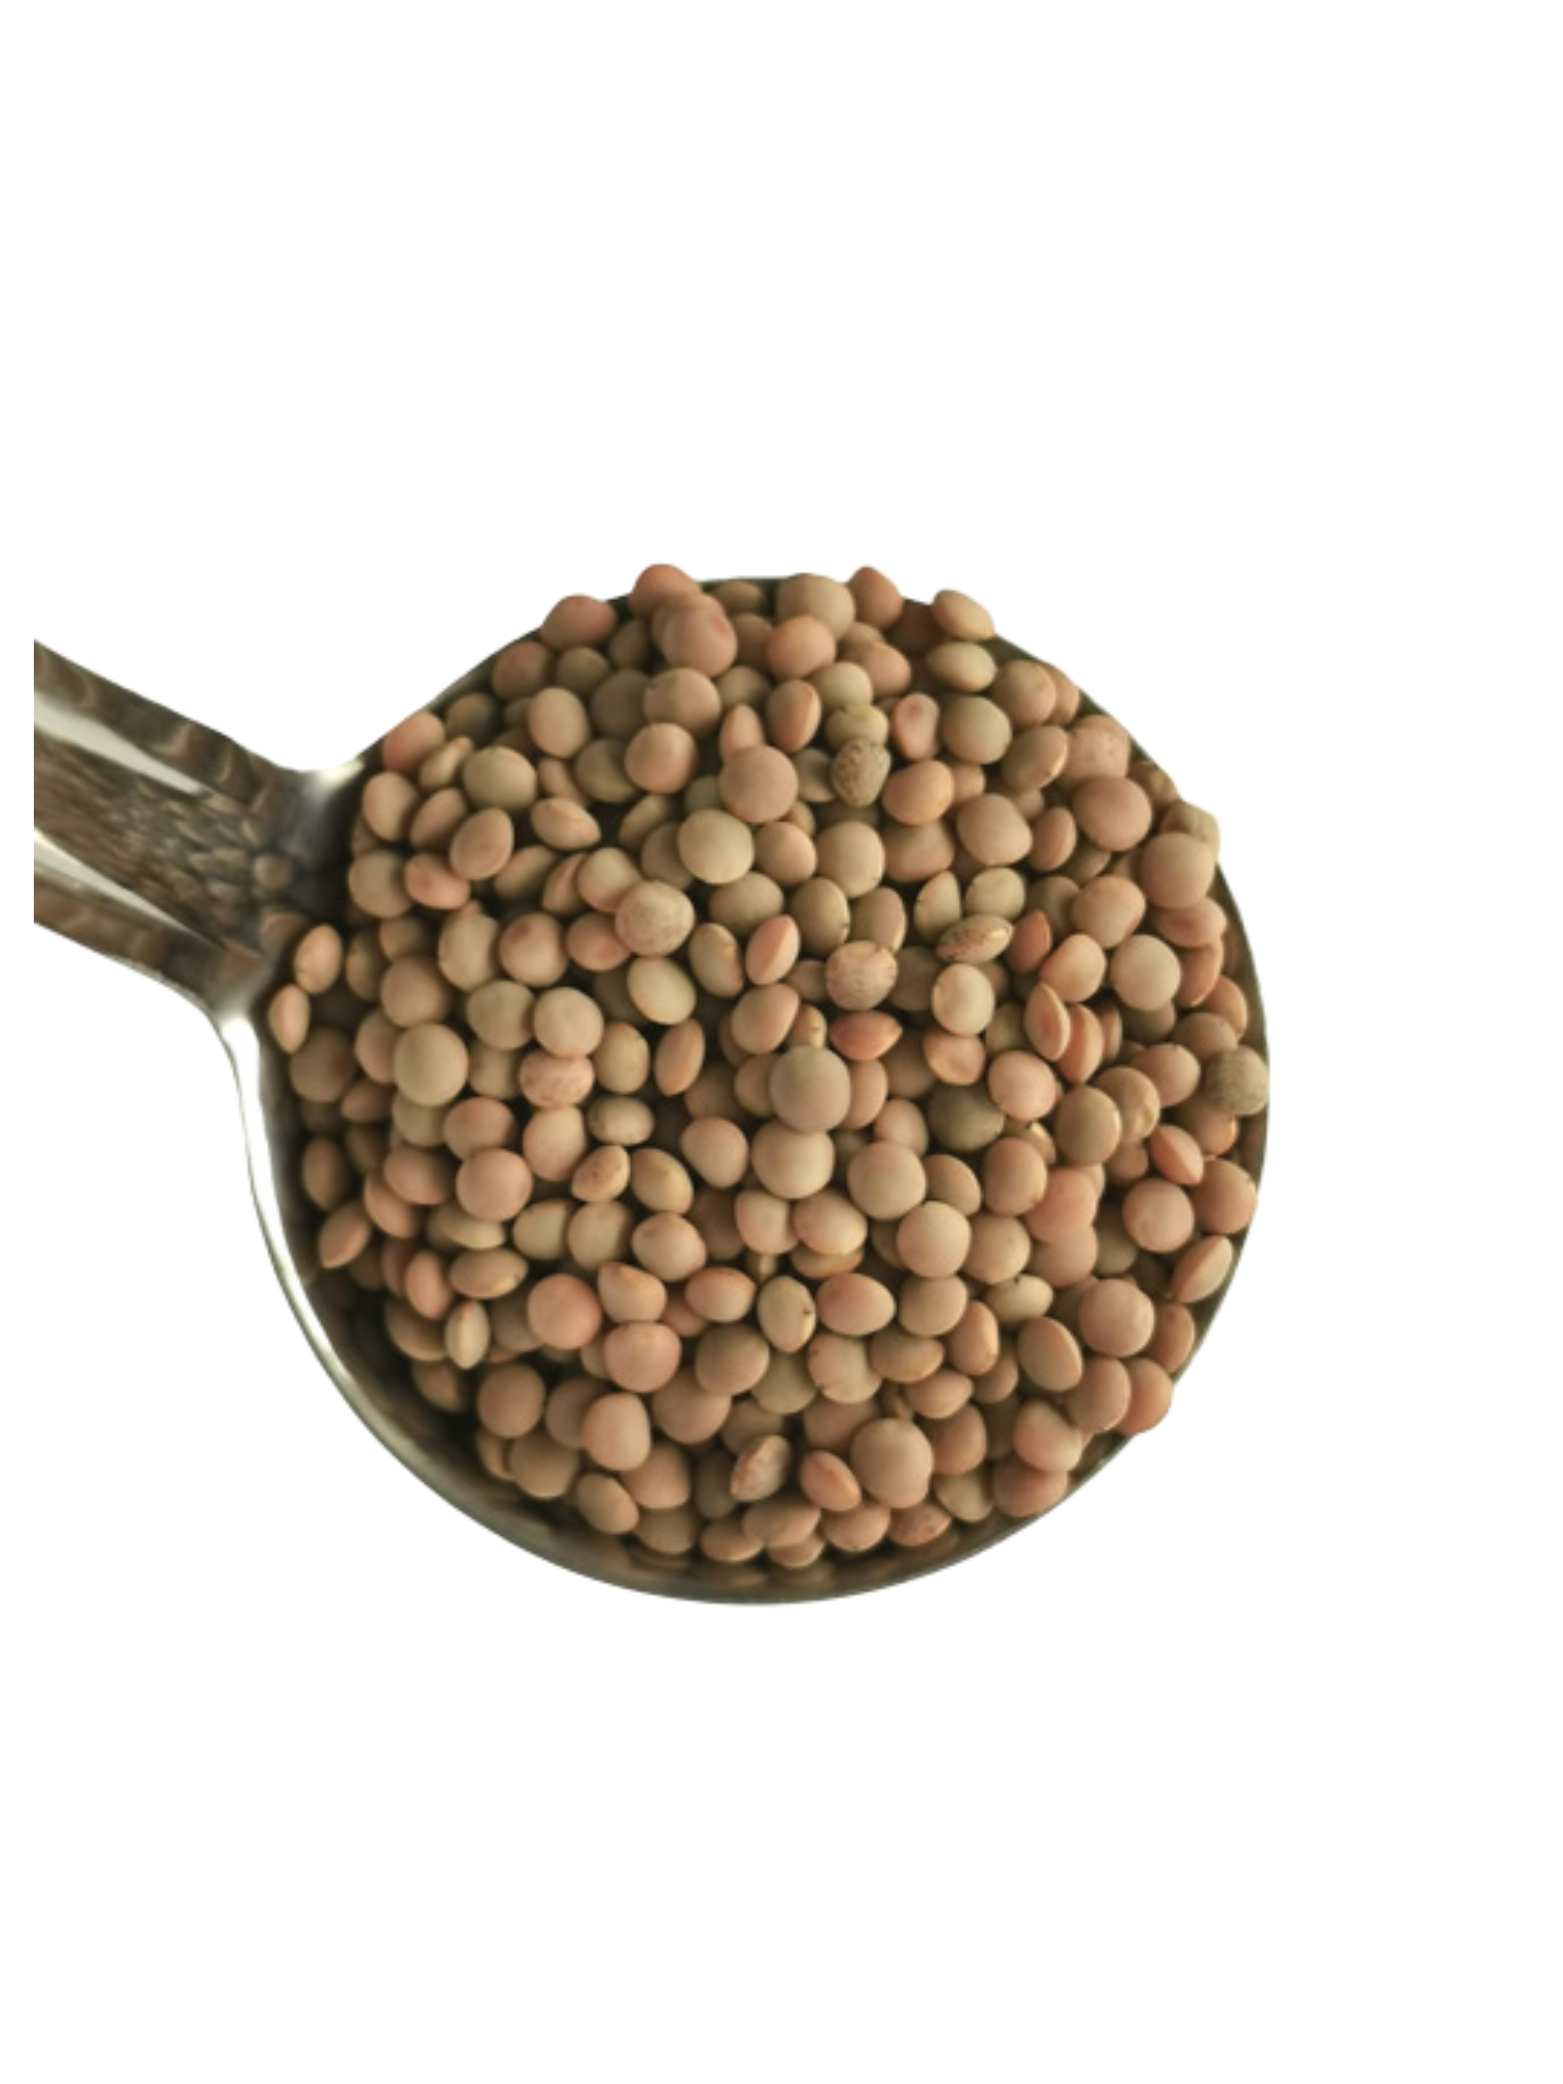 Lentils - Whole Red